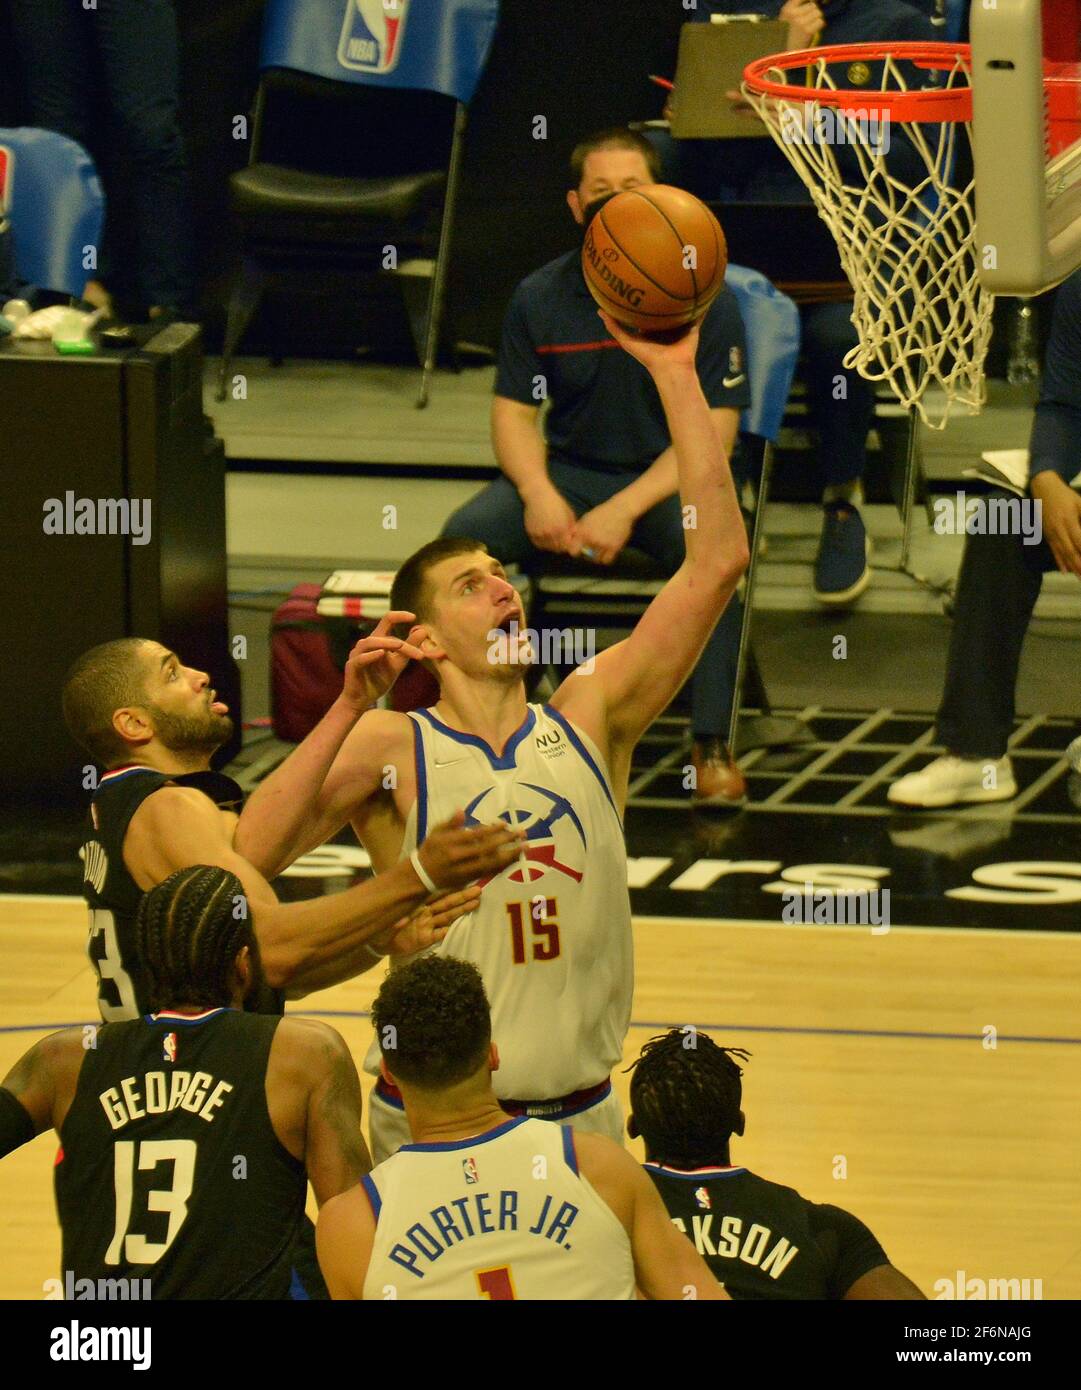 Los Angeles, United States. 01st Apr, 2021. Denver Nuggets' center Nikola Jokic scores on Los Angeles Clippers' defenders during the first half at Staples Center in Los Angeles on Thursday, April 1, 2021. The Nuggets defeated the Clippers 101-94. Photo by Jim Ruymen/UPI Credit: UPI/Alamy Live News Stock Photo